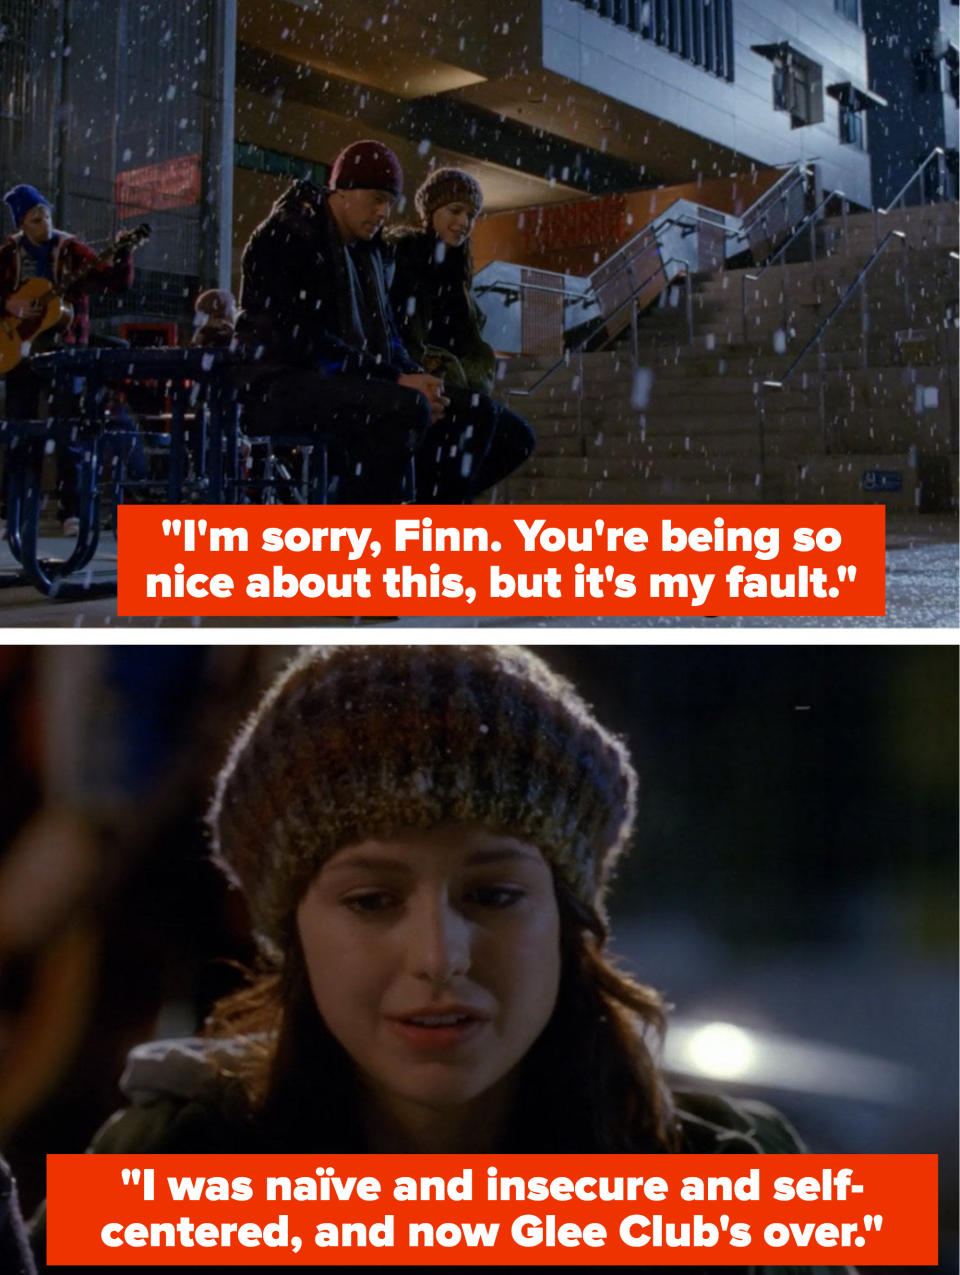 Marley telling Finn: "I was naïve and insecure and self-centered, and now Glee Club's over"